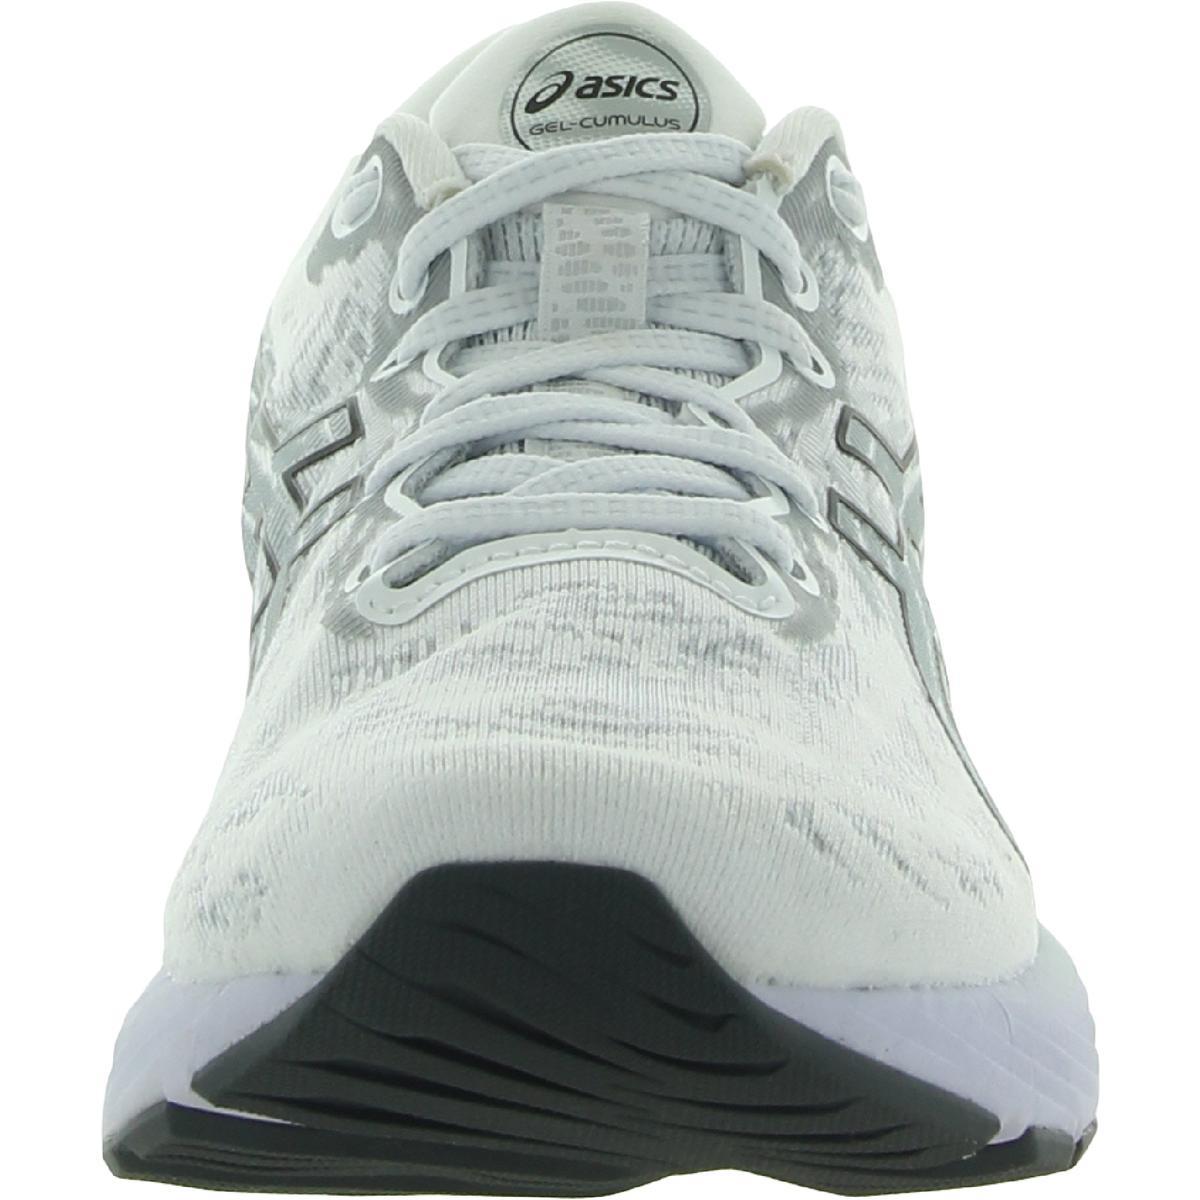 Asics Womens Gel-cumulus 23 Fitness Lifestyle Running Shoes Sneakers Bhfo 5008 Piedmont Grey/White